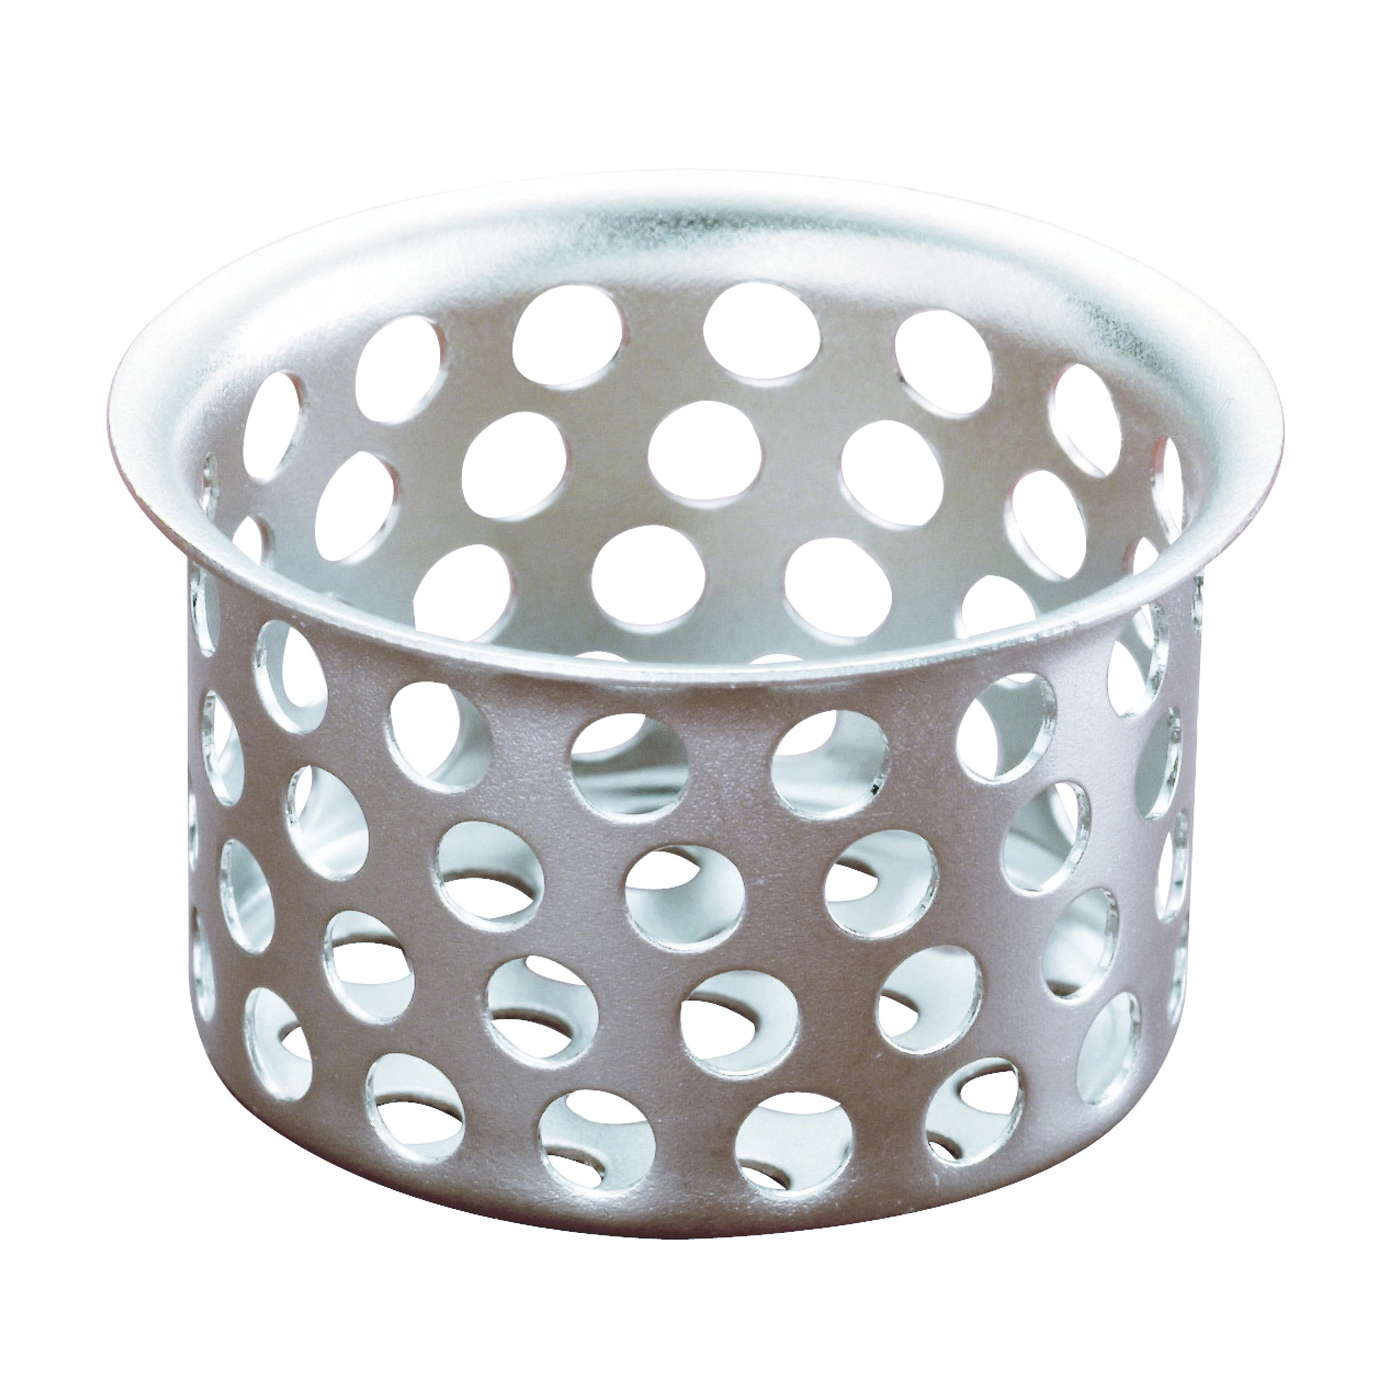 PP820-37 Basket Strainer, 1 in Dia, Stainless Steel, Chrome, For: Sink